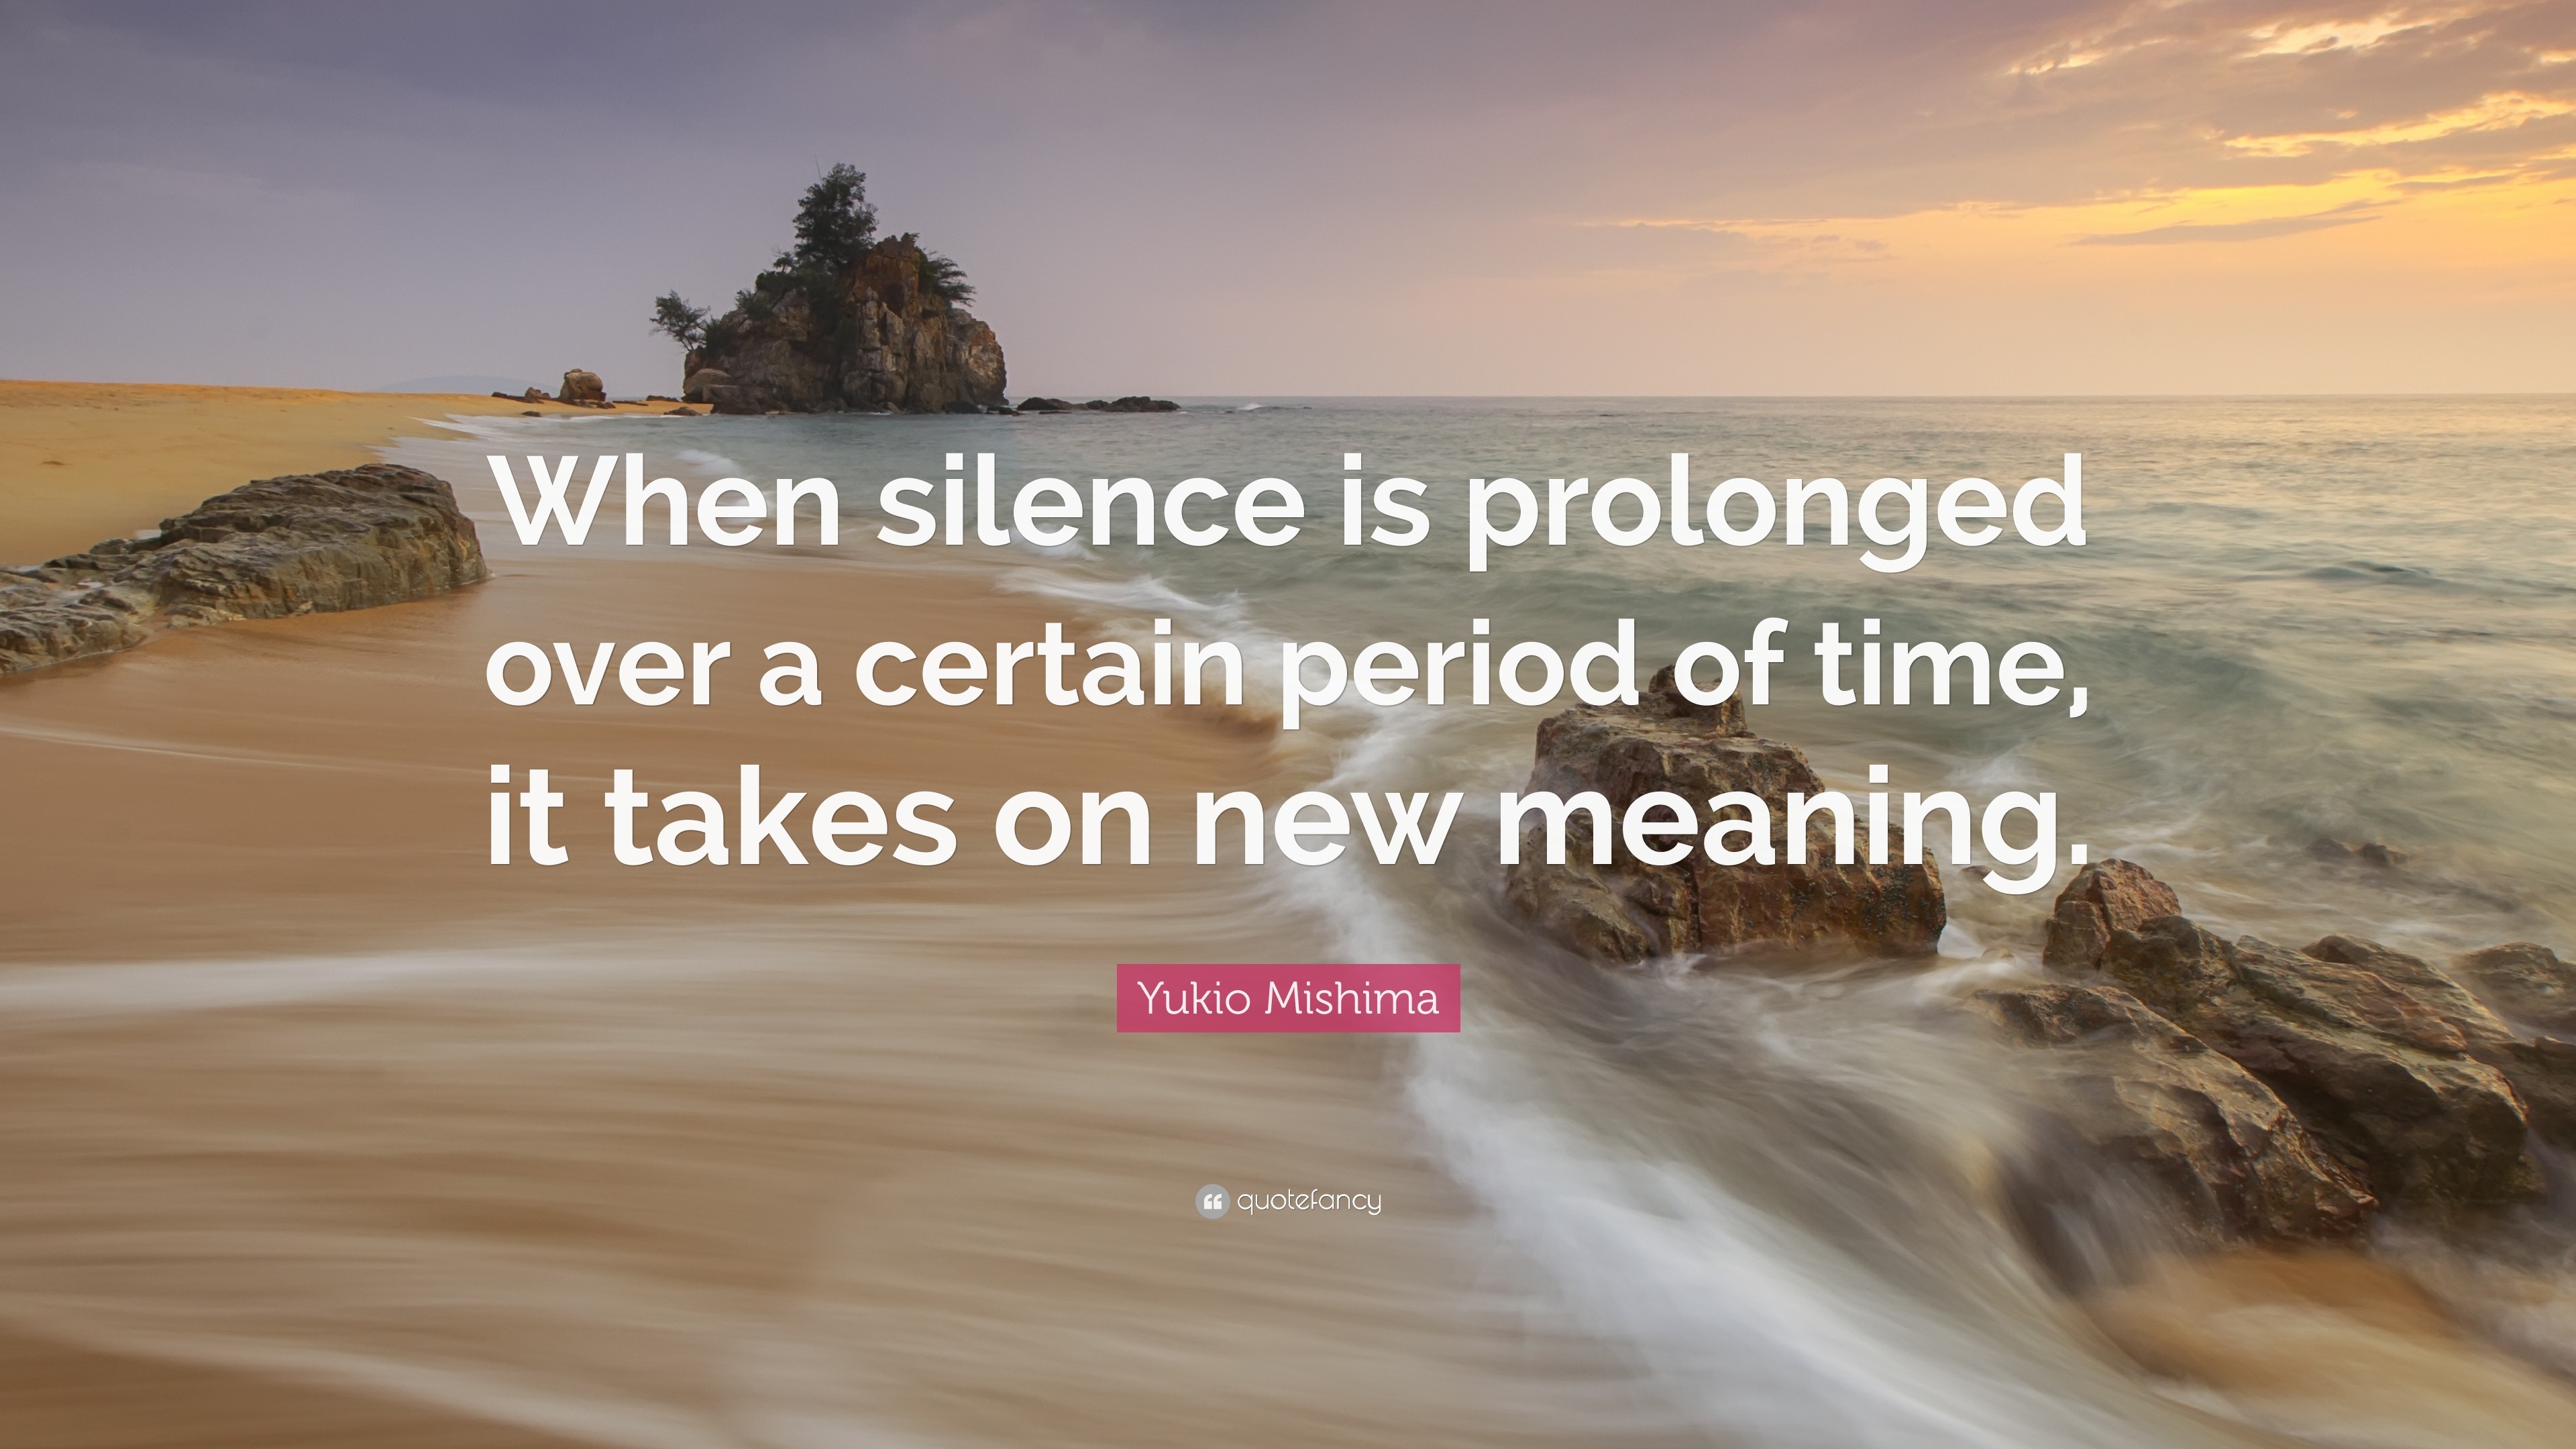 Yukio Mishima Quote: “When silence is prolonged over a certain period ...